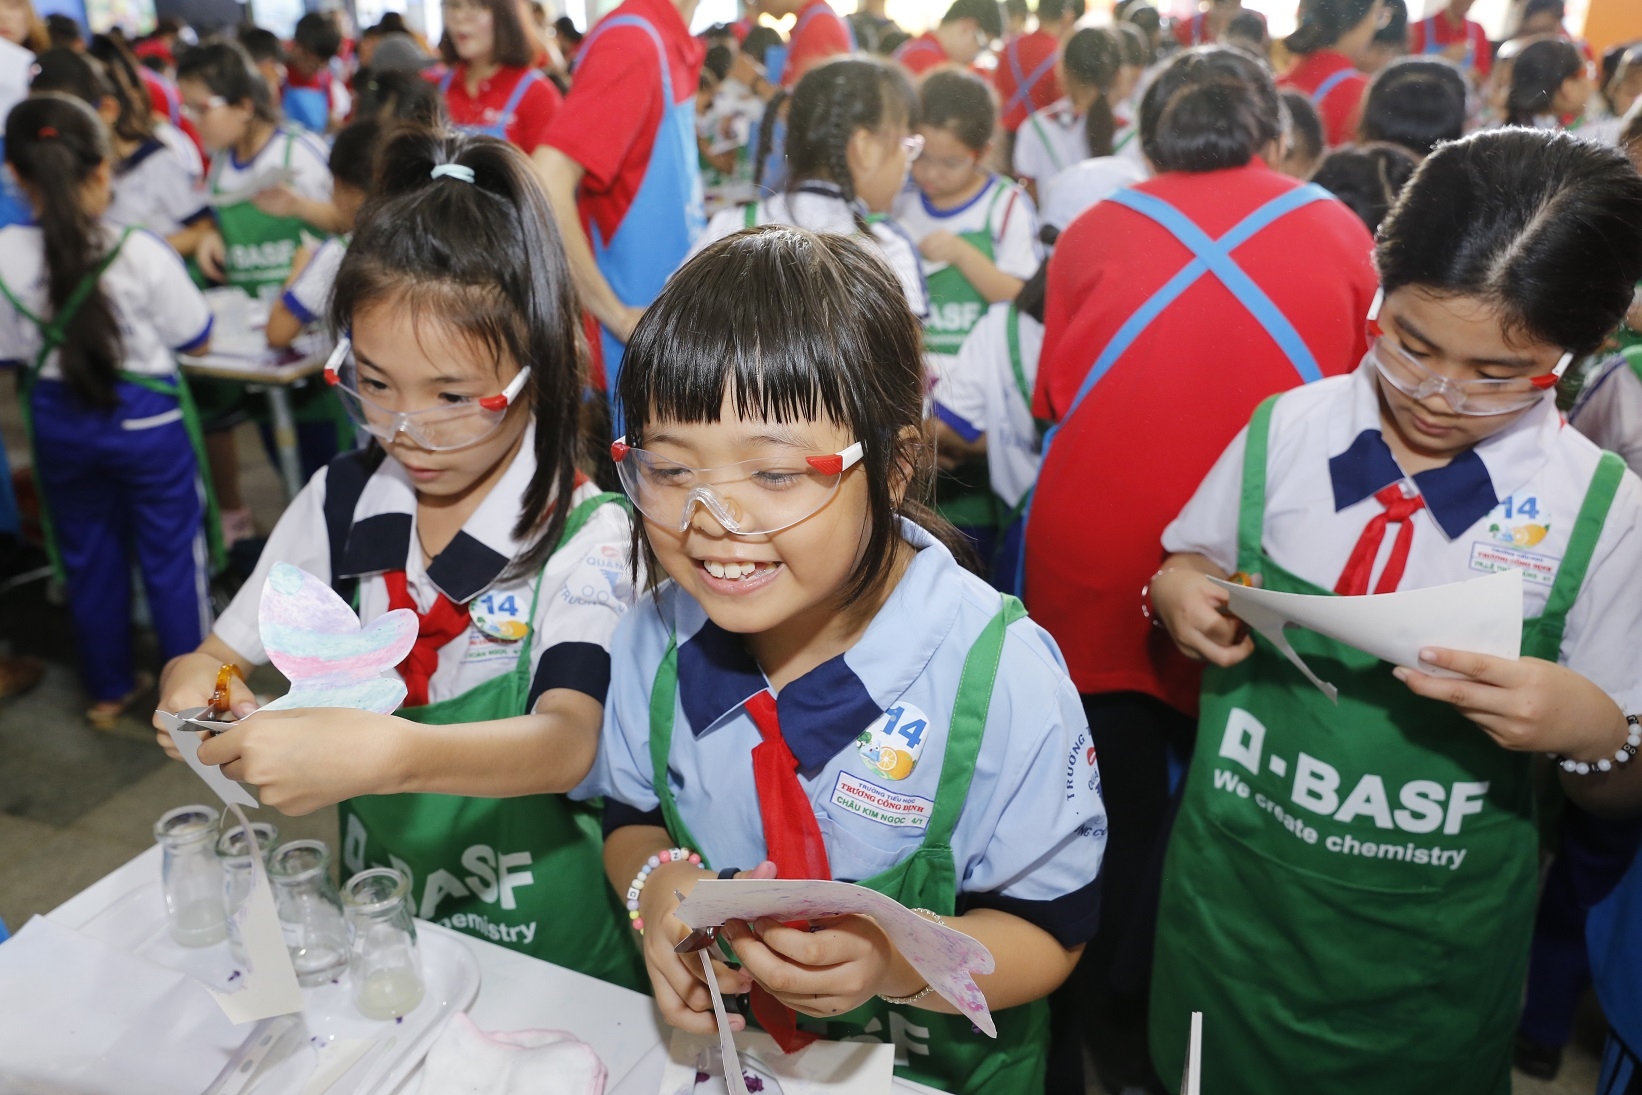 BASF Kids’ Lab 2018 brings chemistry to the young and needy